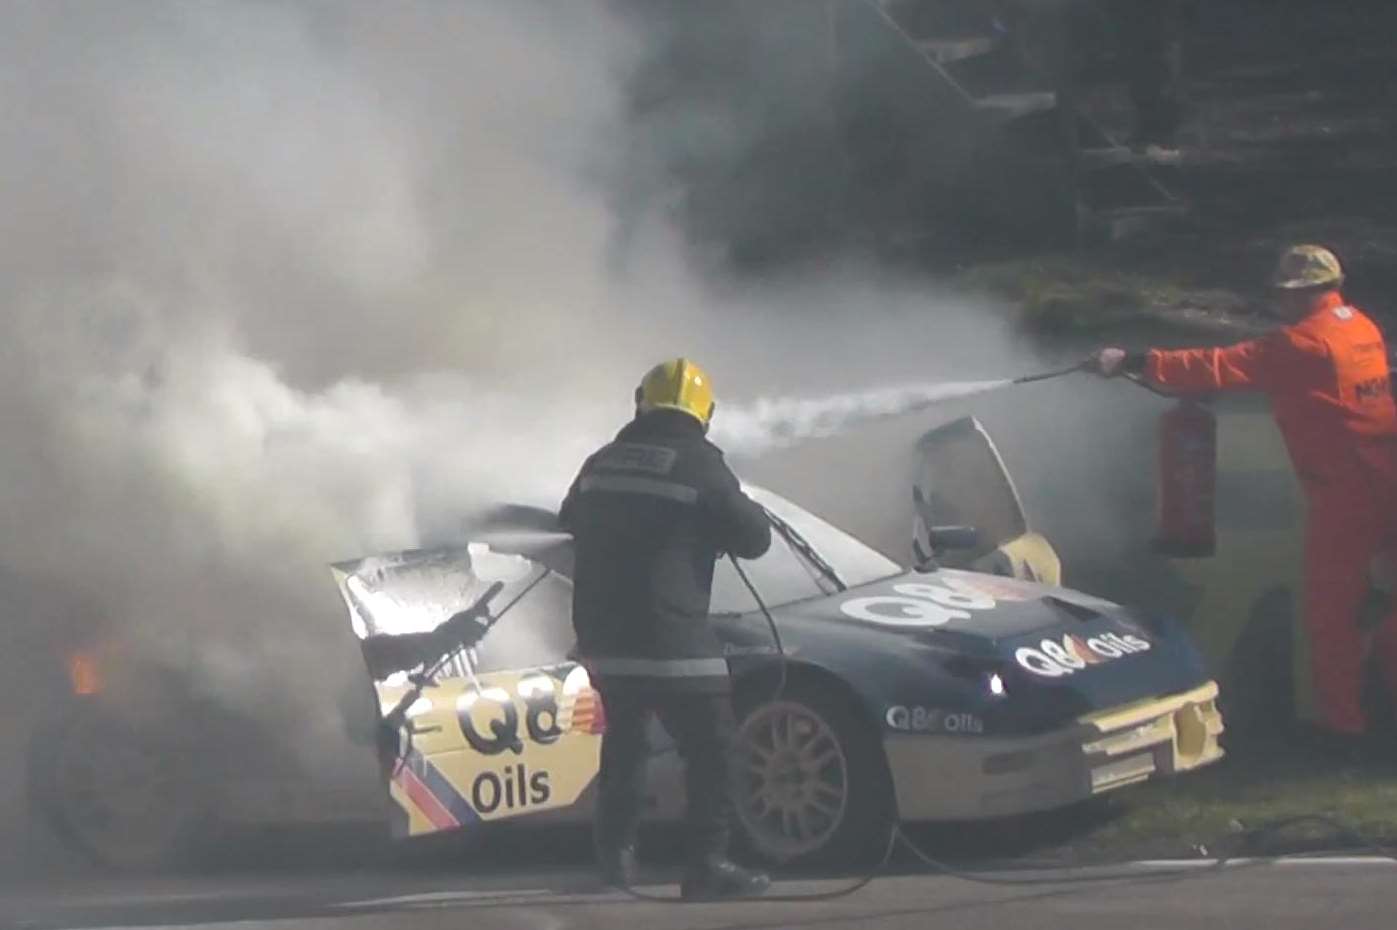 Fire crews arrive to tackle the blaze that engulfed Pat Doran's car. Picture: allthekasparas/YouTube